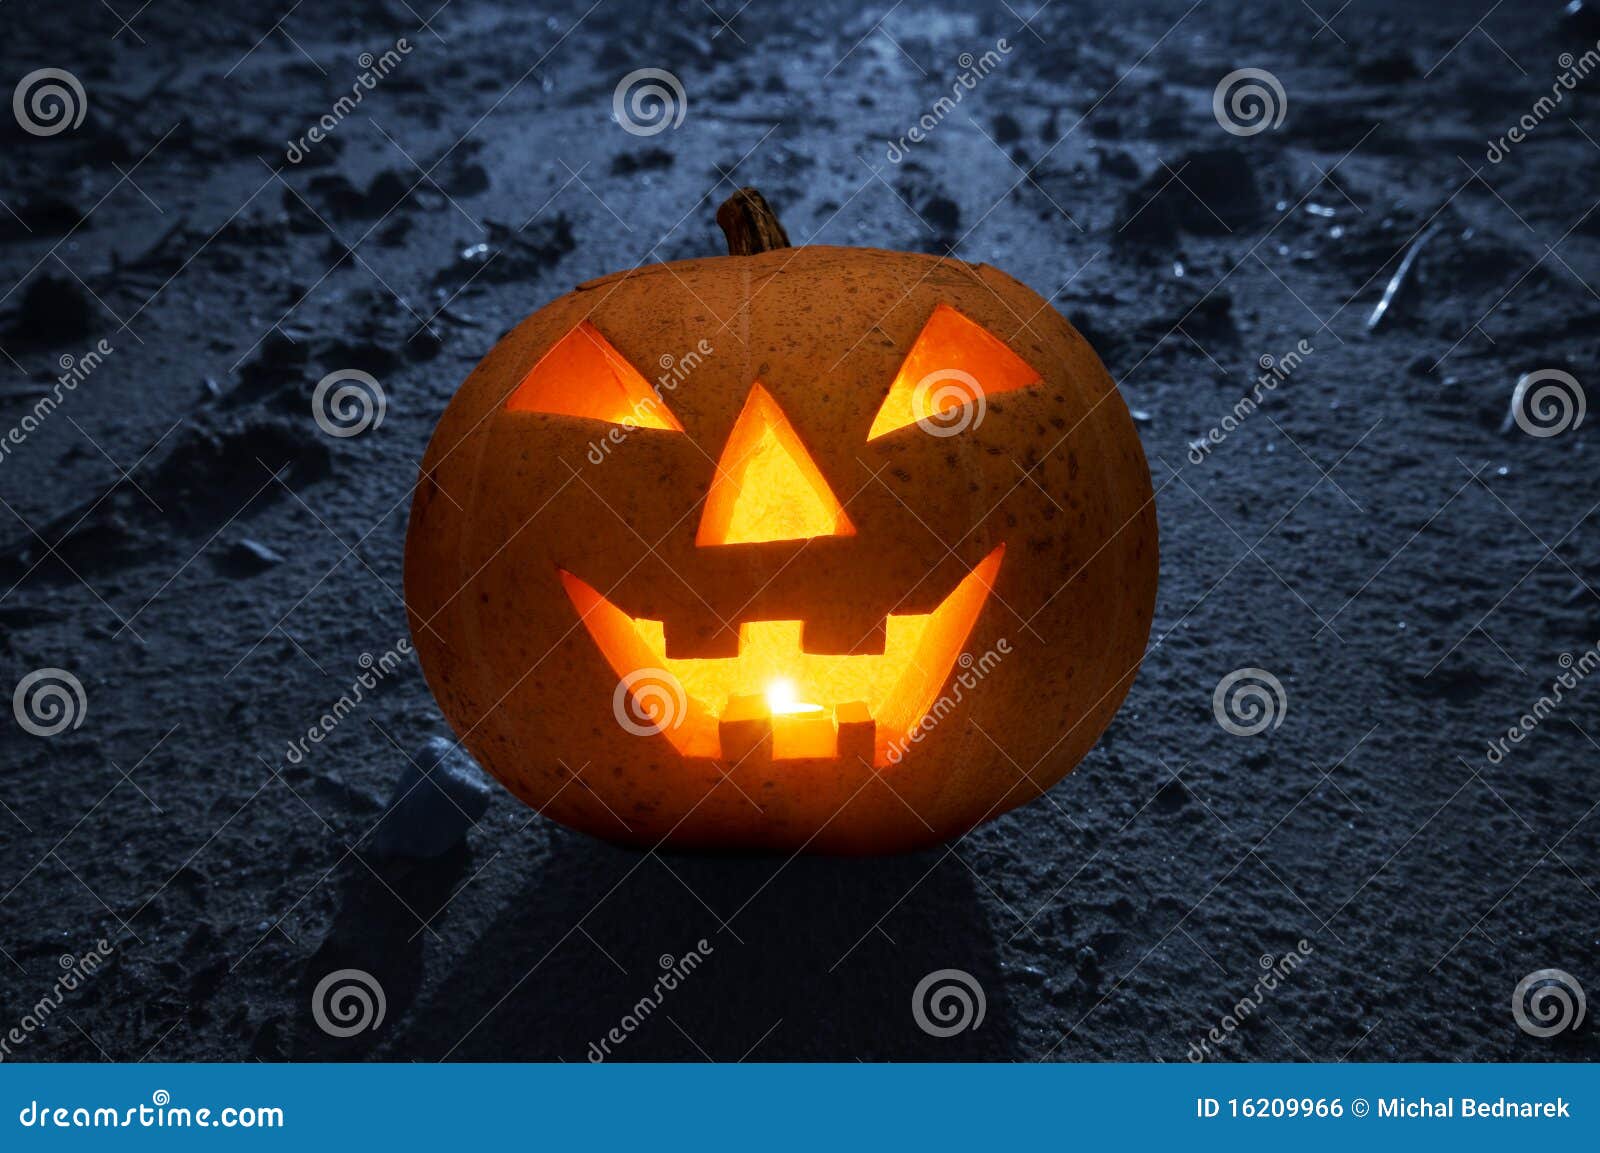 Halloween Glowing Pumpkin at Night Stock Photo - Image of face, carved ...